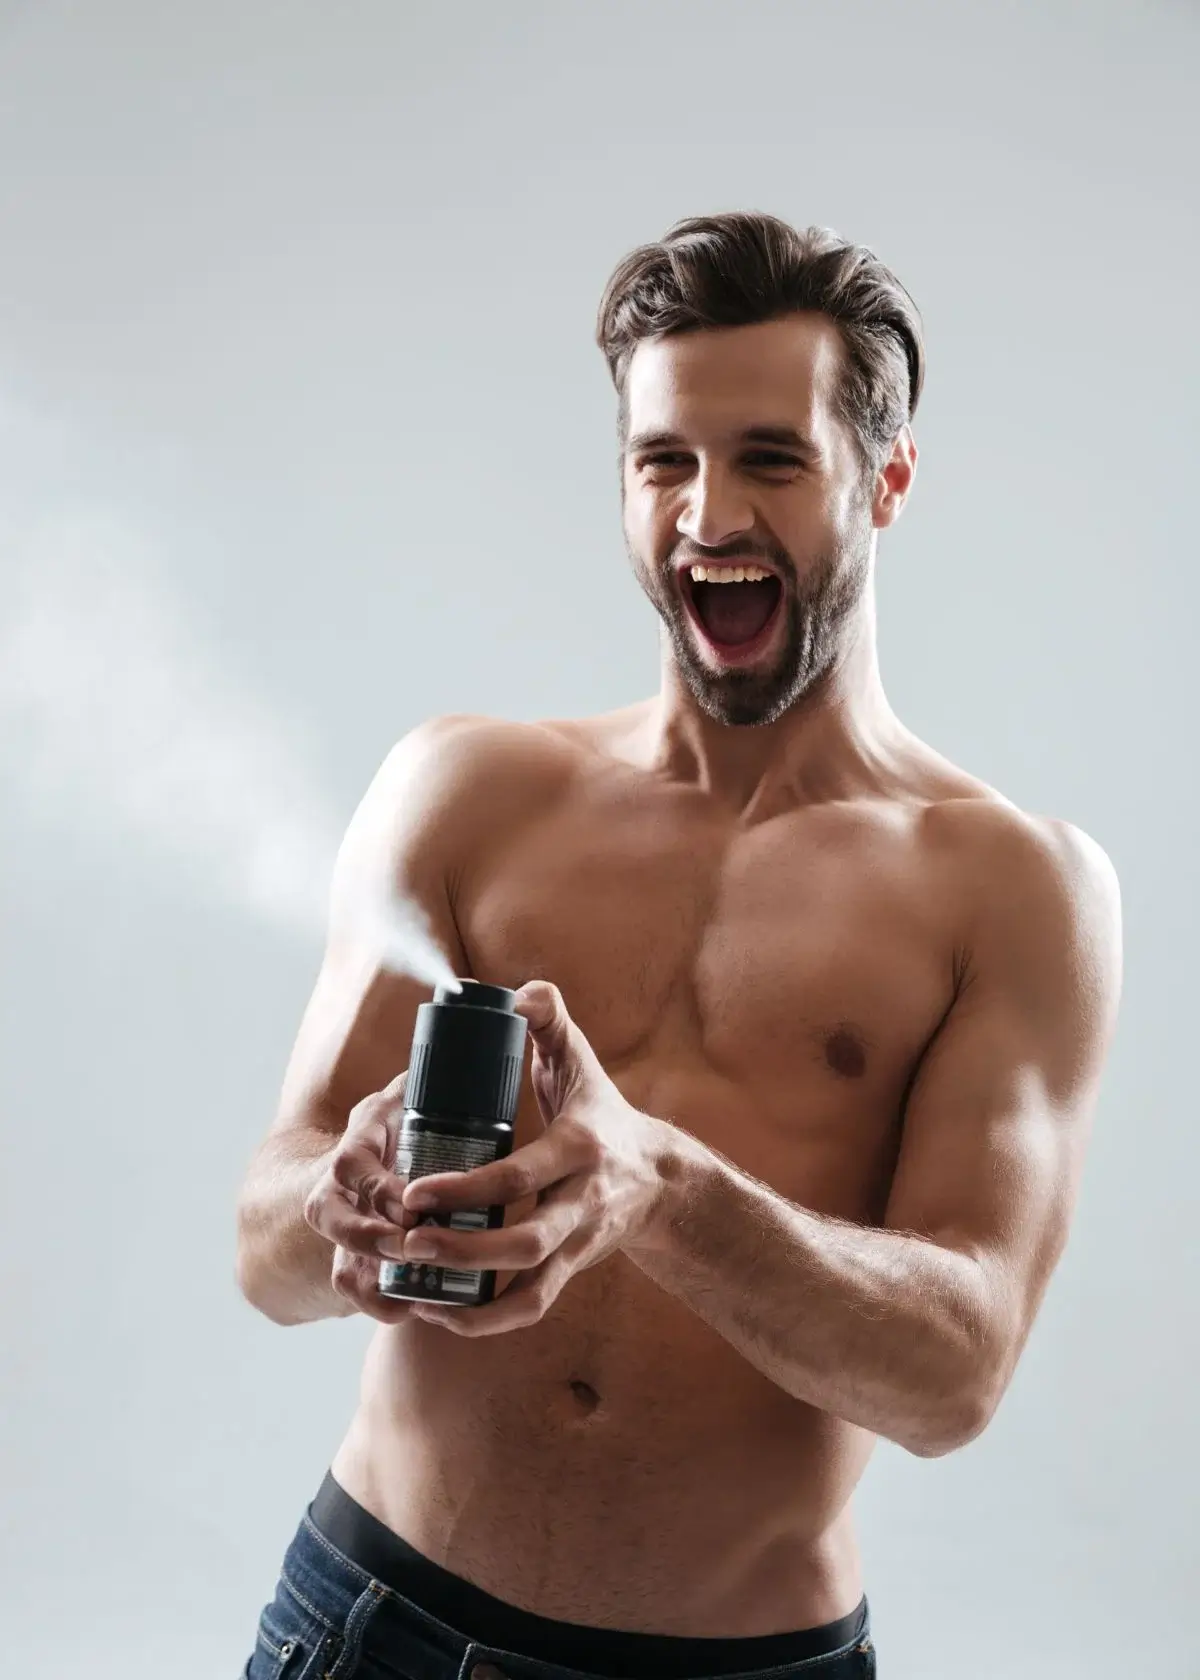 What are the Main reasons for Choosing an Aluminum-Free Deodorant for Men over traditional Antiperspirants Containing Aluminum?